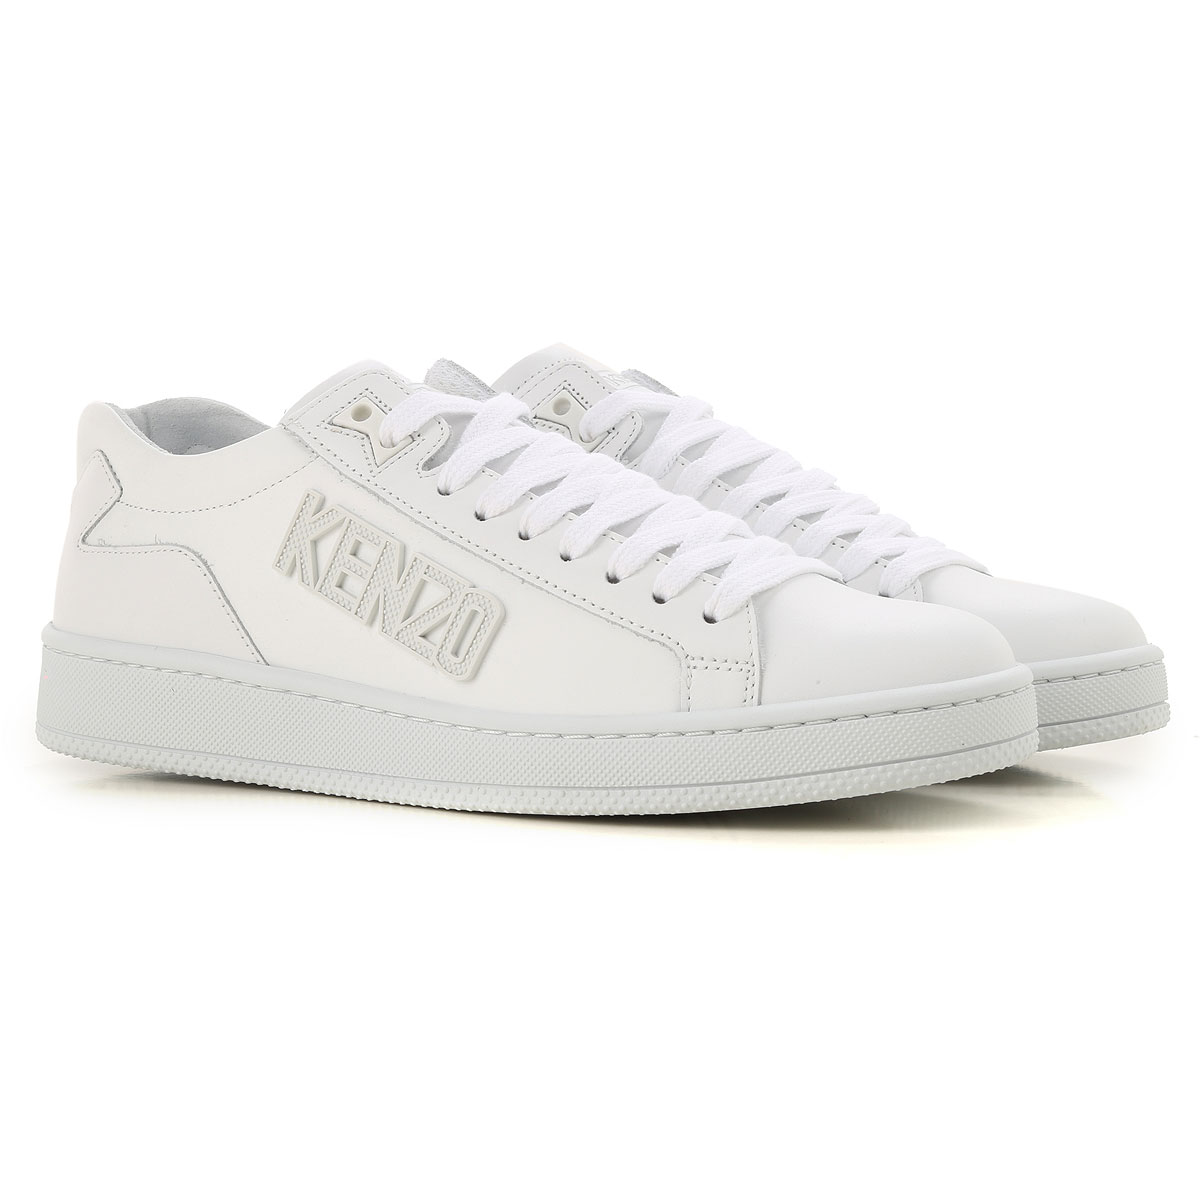 Mens Shoes Kenzo, Style code: f005sn127-001-white